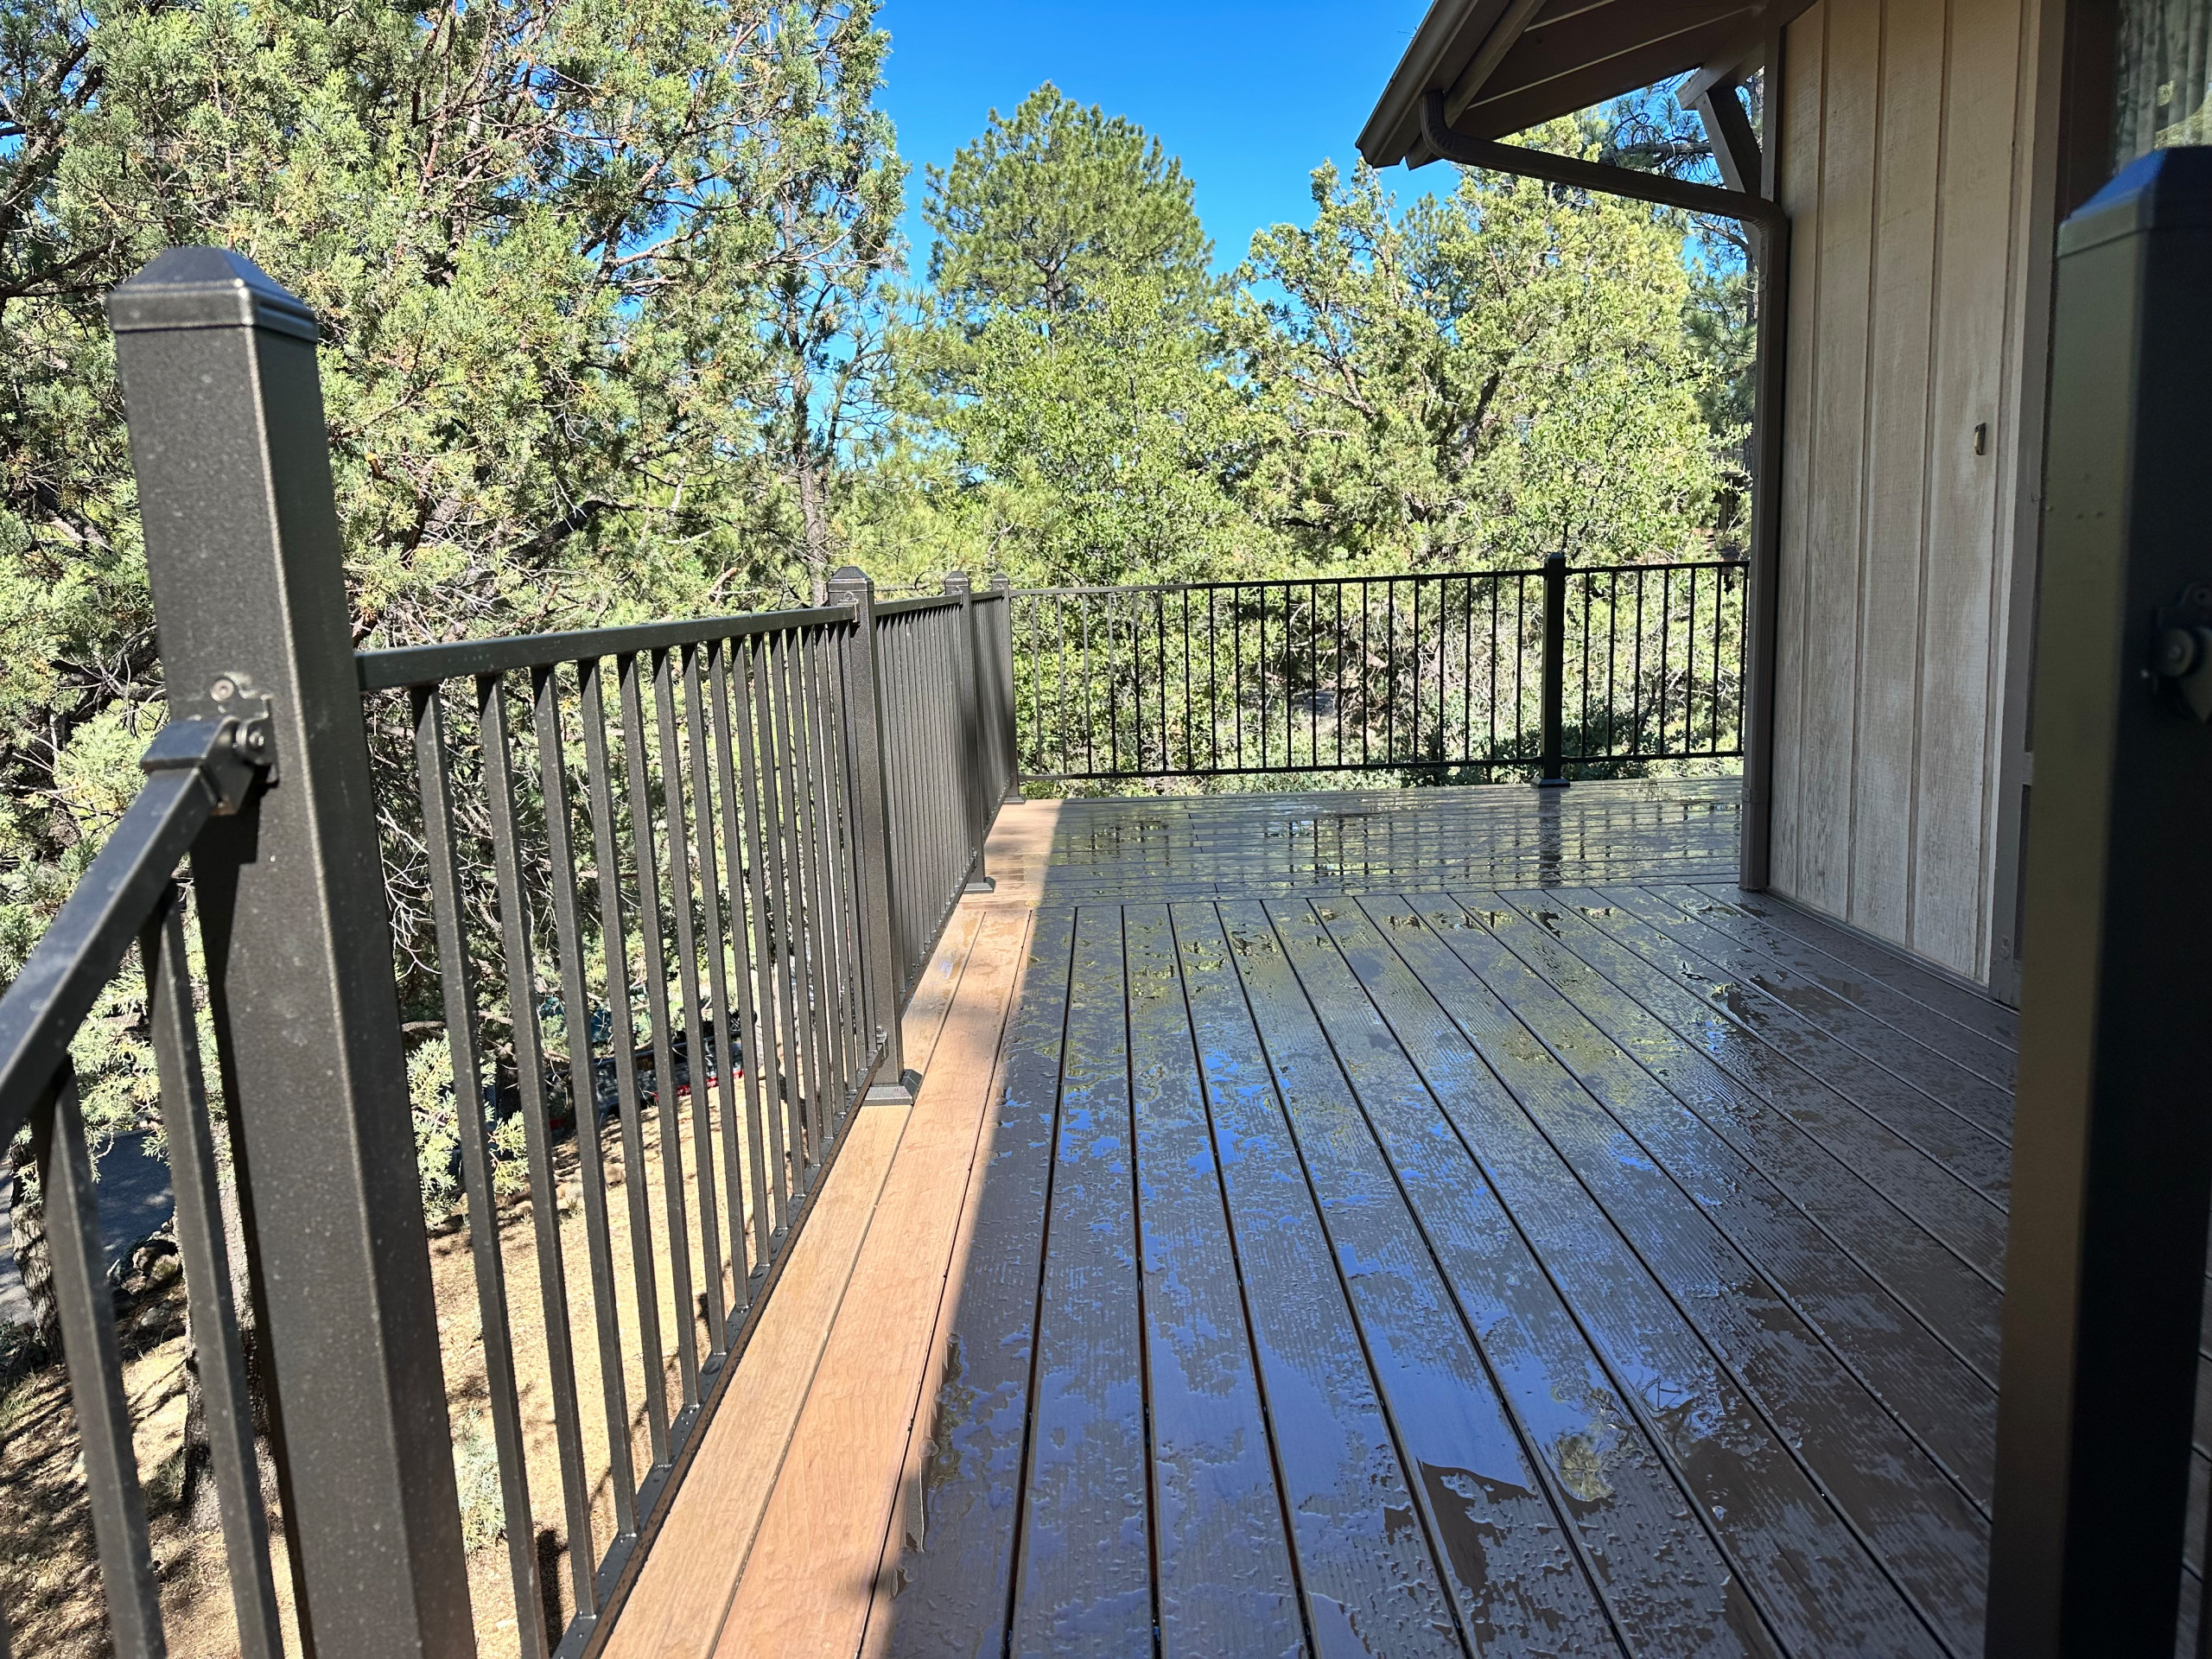 Deck rebuild with Timber Tech decking and Fortress railing.